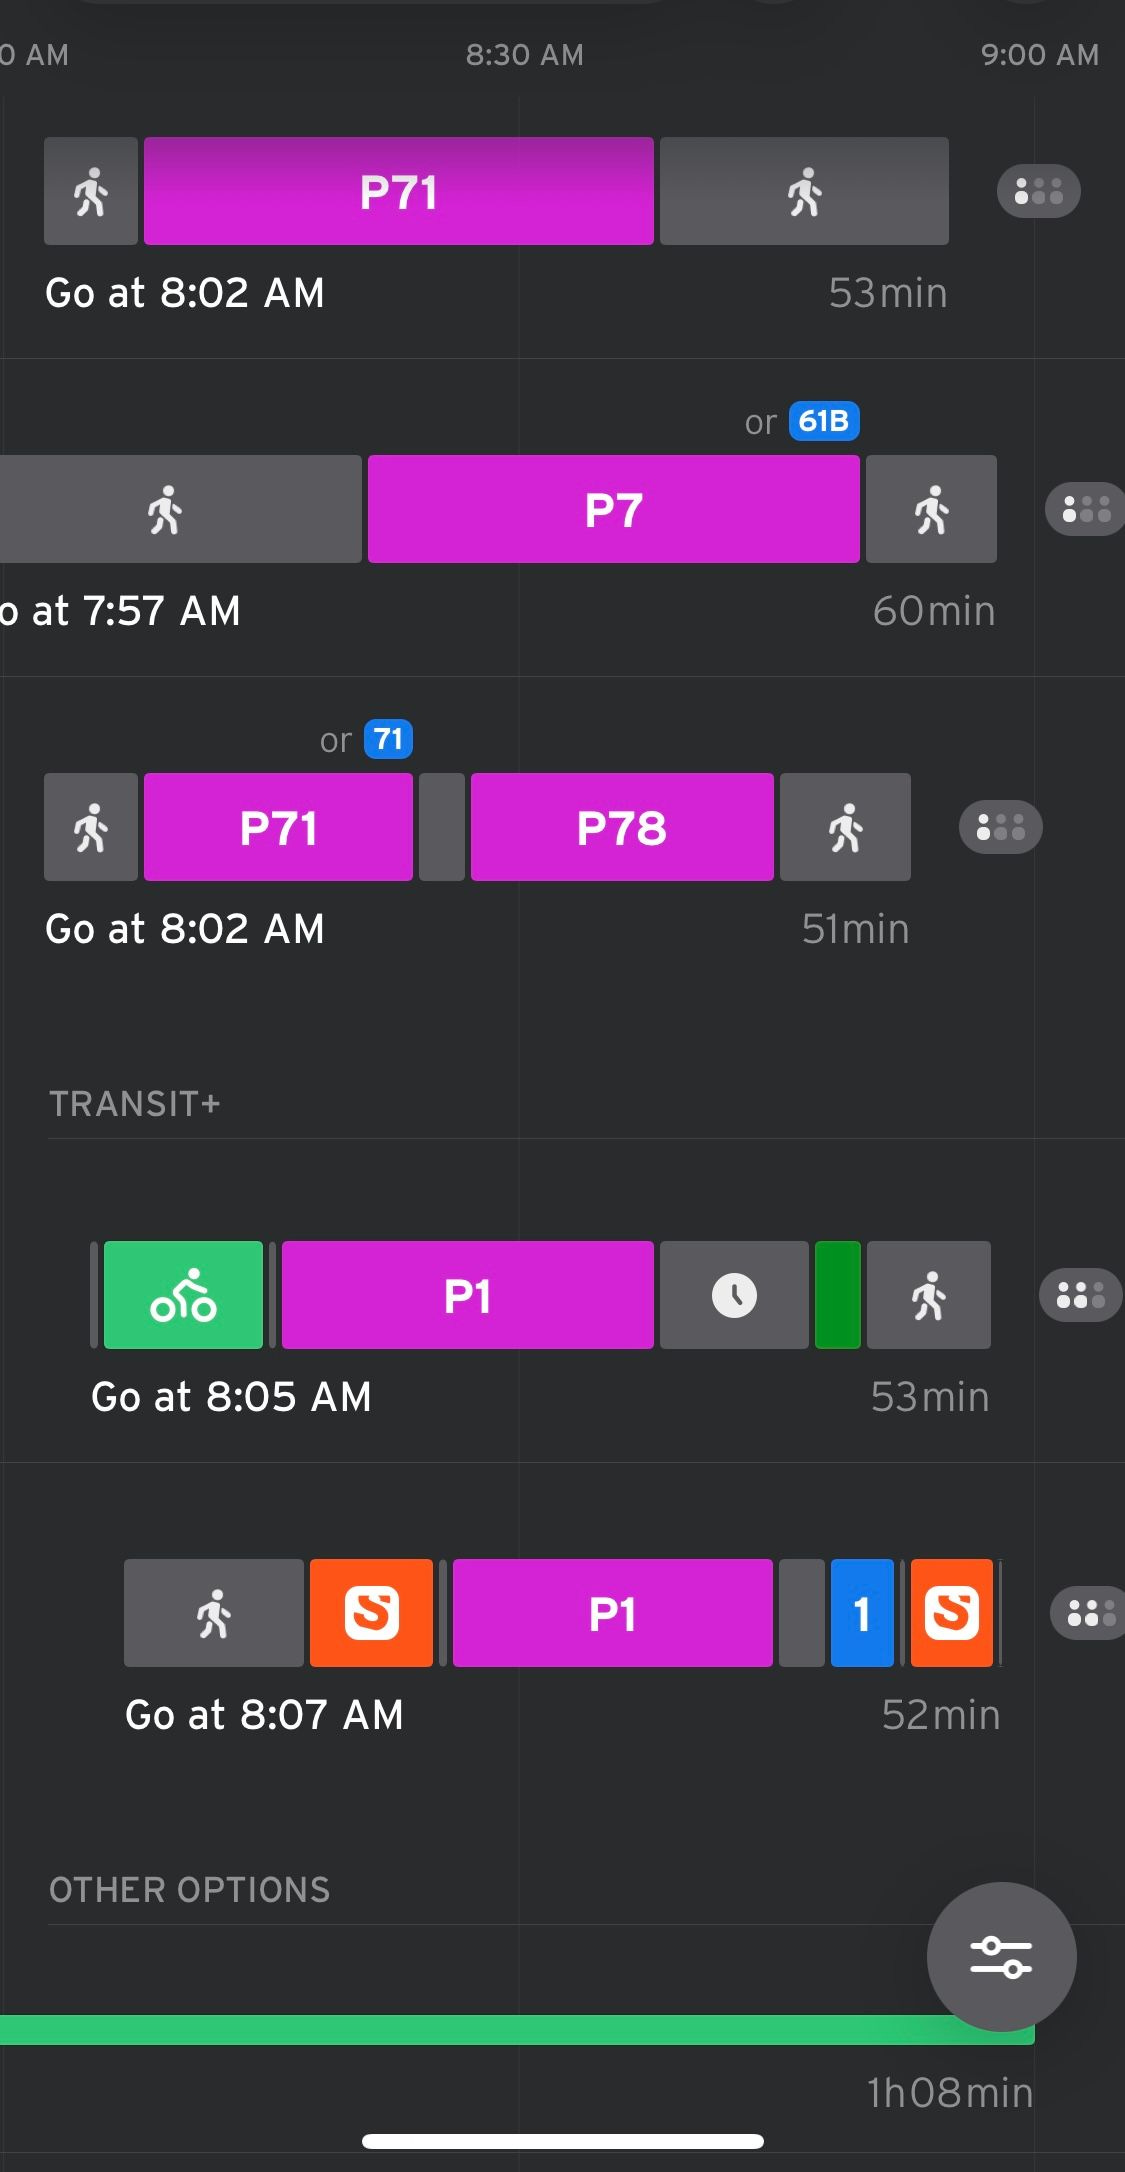 My First Multimodal Commute Using Pittsburgh's New(ish) Transit App